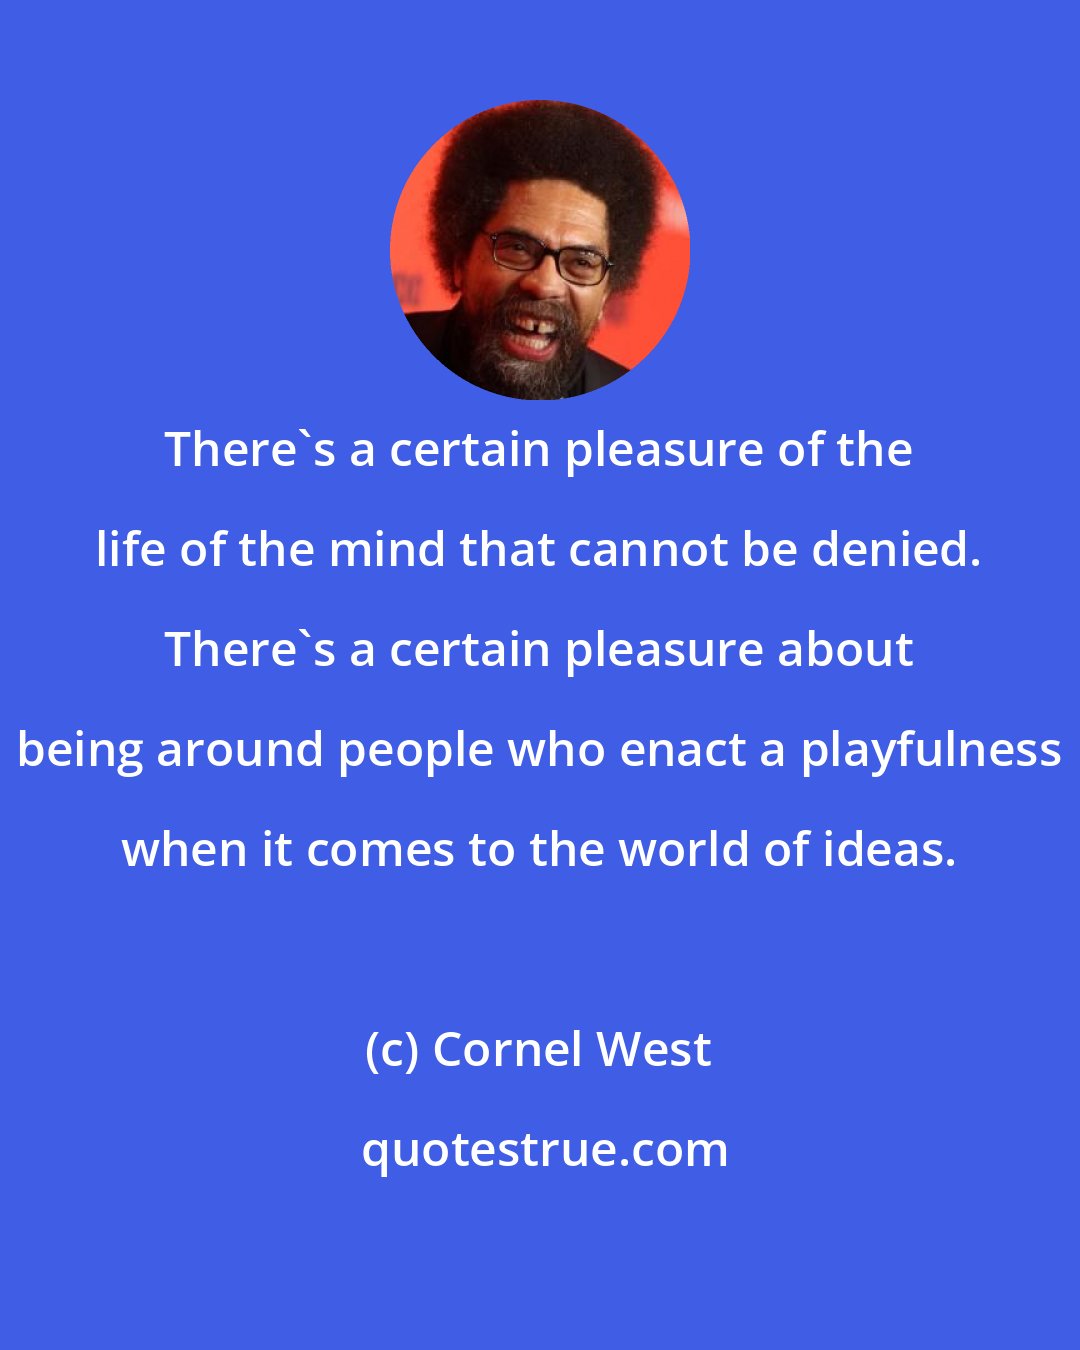 Cornel West: There's a certain pleasure of the life of the mind that cannot be denied. There's a certain pleasure about being around people who enact a playfulness when it comes to the world of ideas.